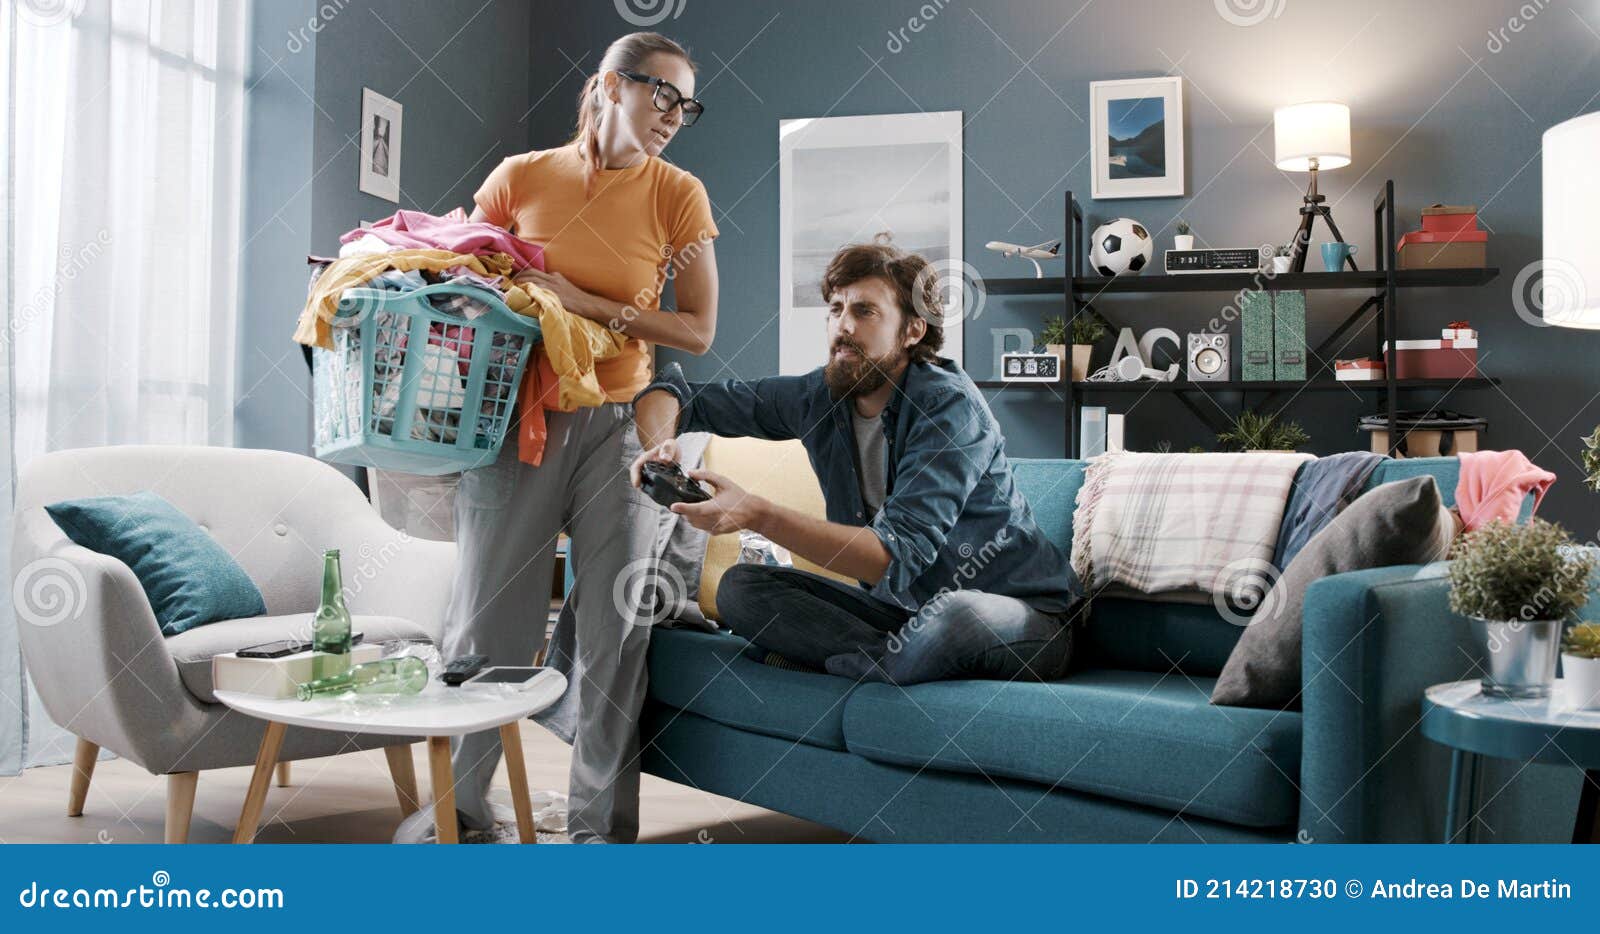 lazy husband and woman doing household chores